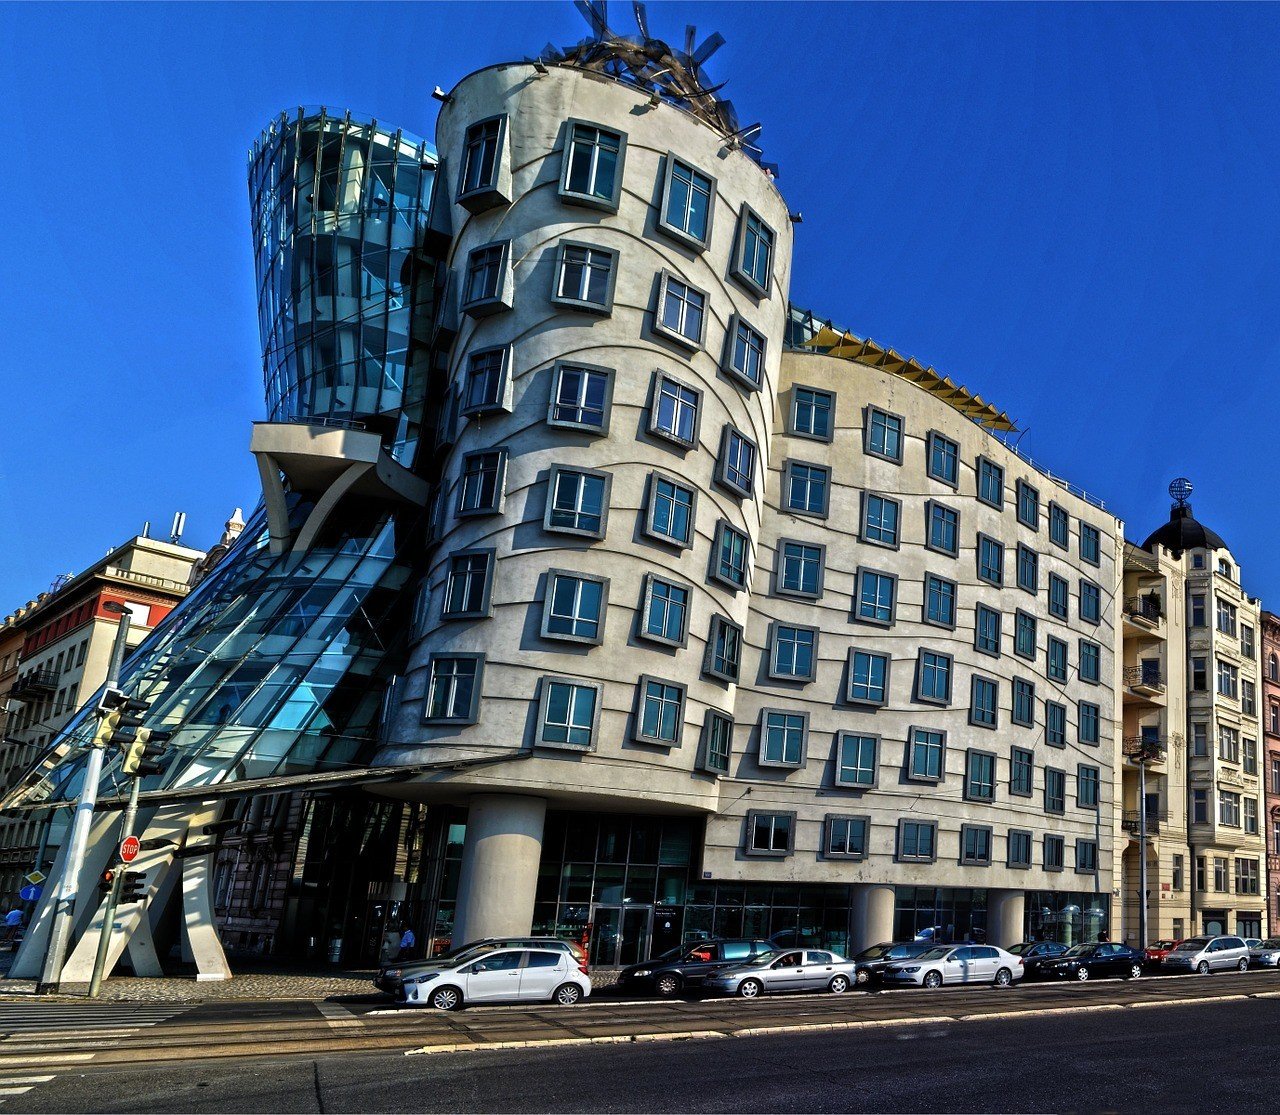 The Dancing House of Prague